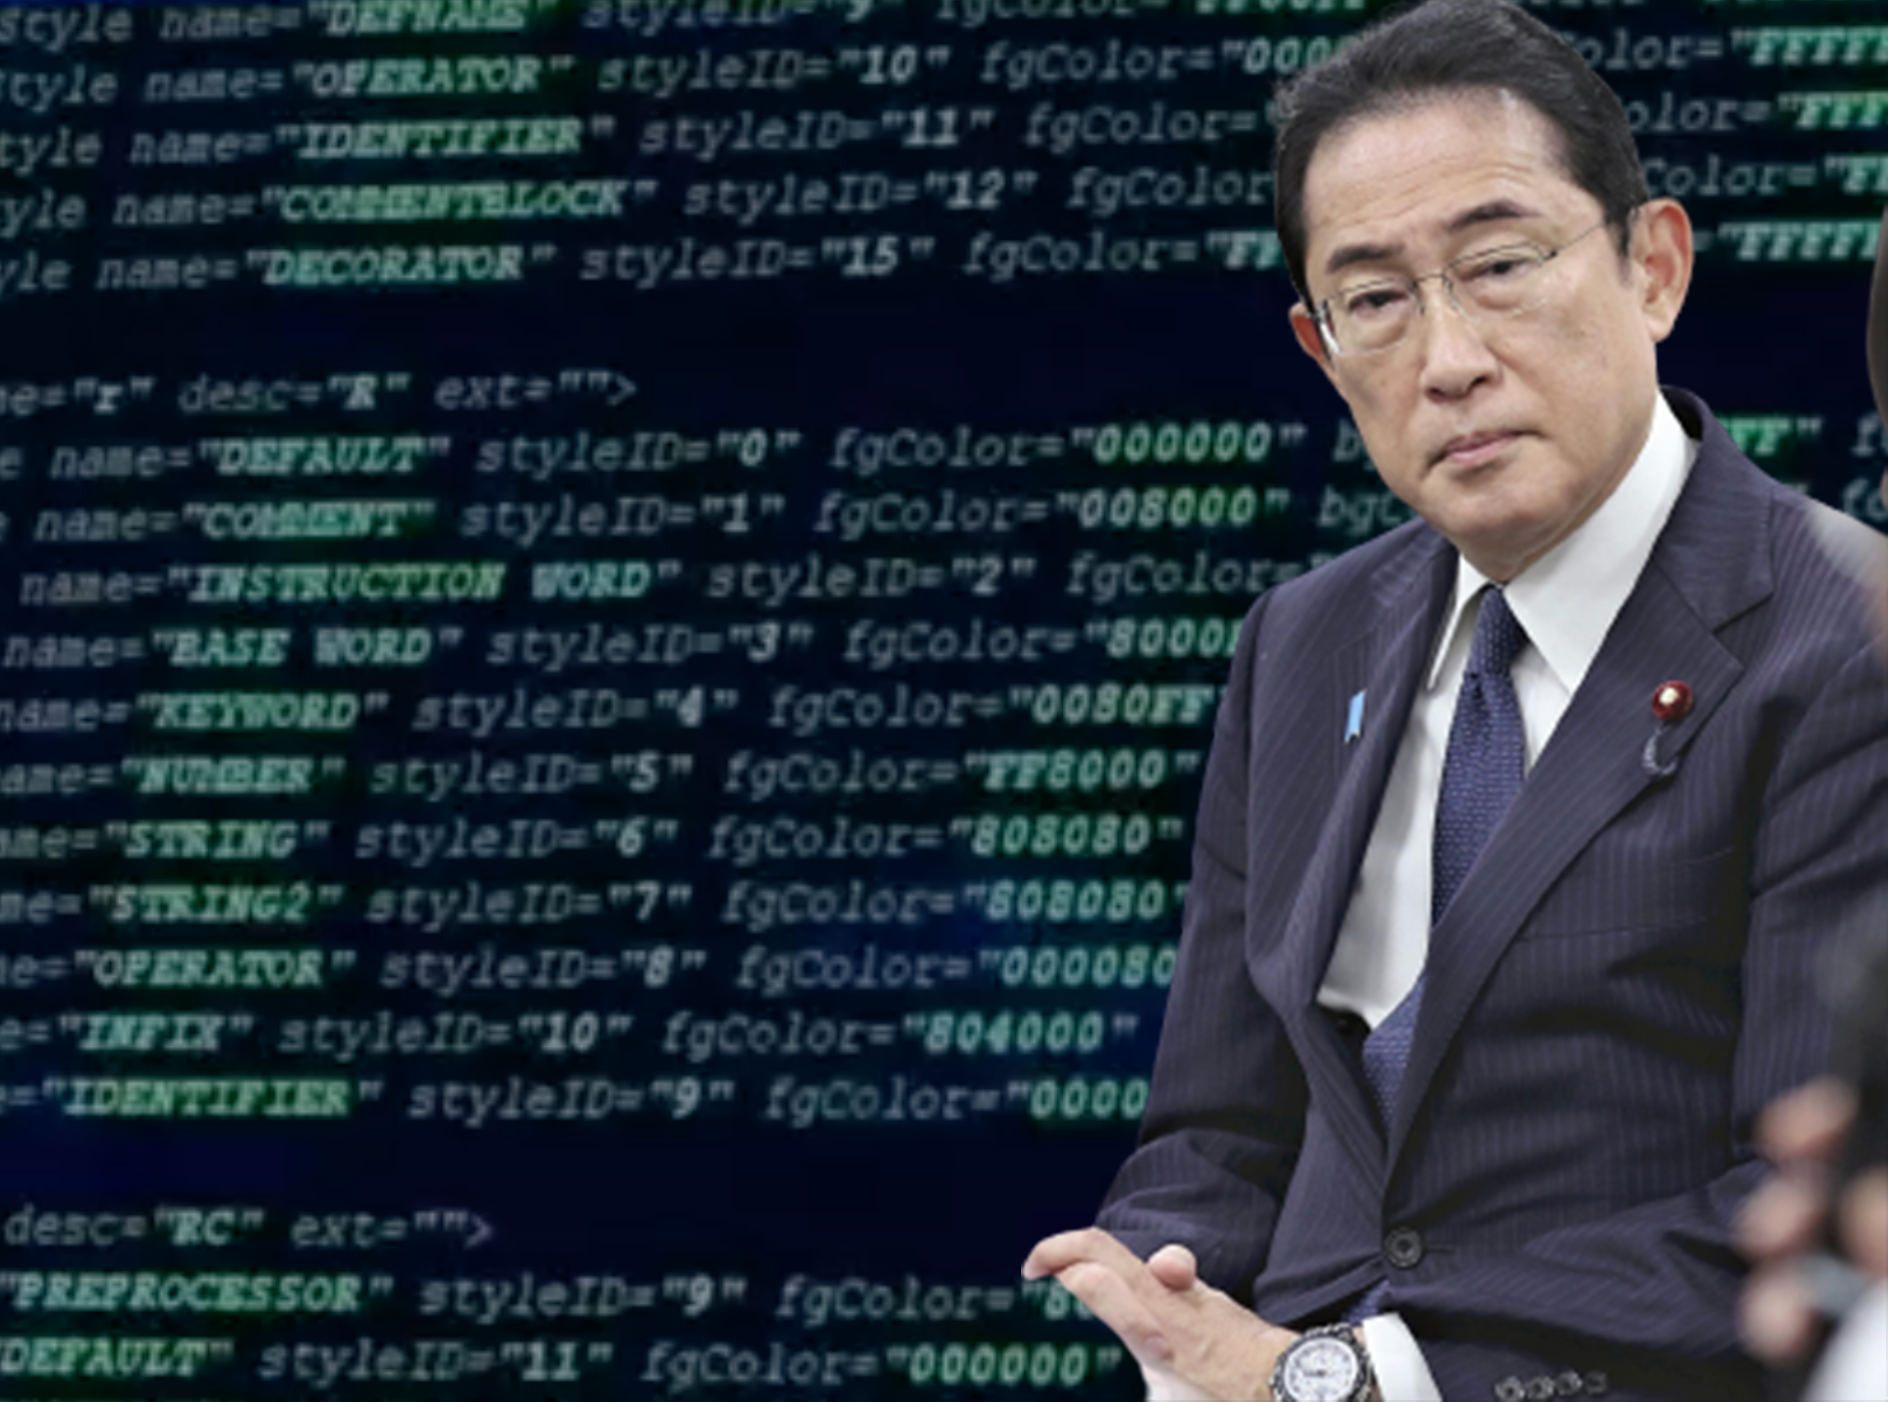 In late 2020, the Japanese government’s secret security computer network was reportedly breached by Chinese military hackers.